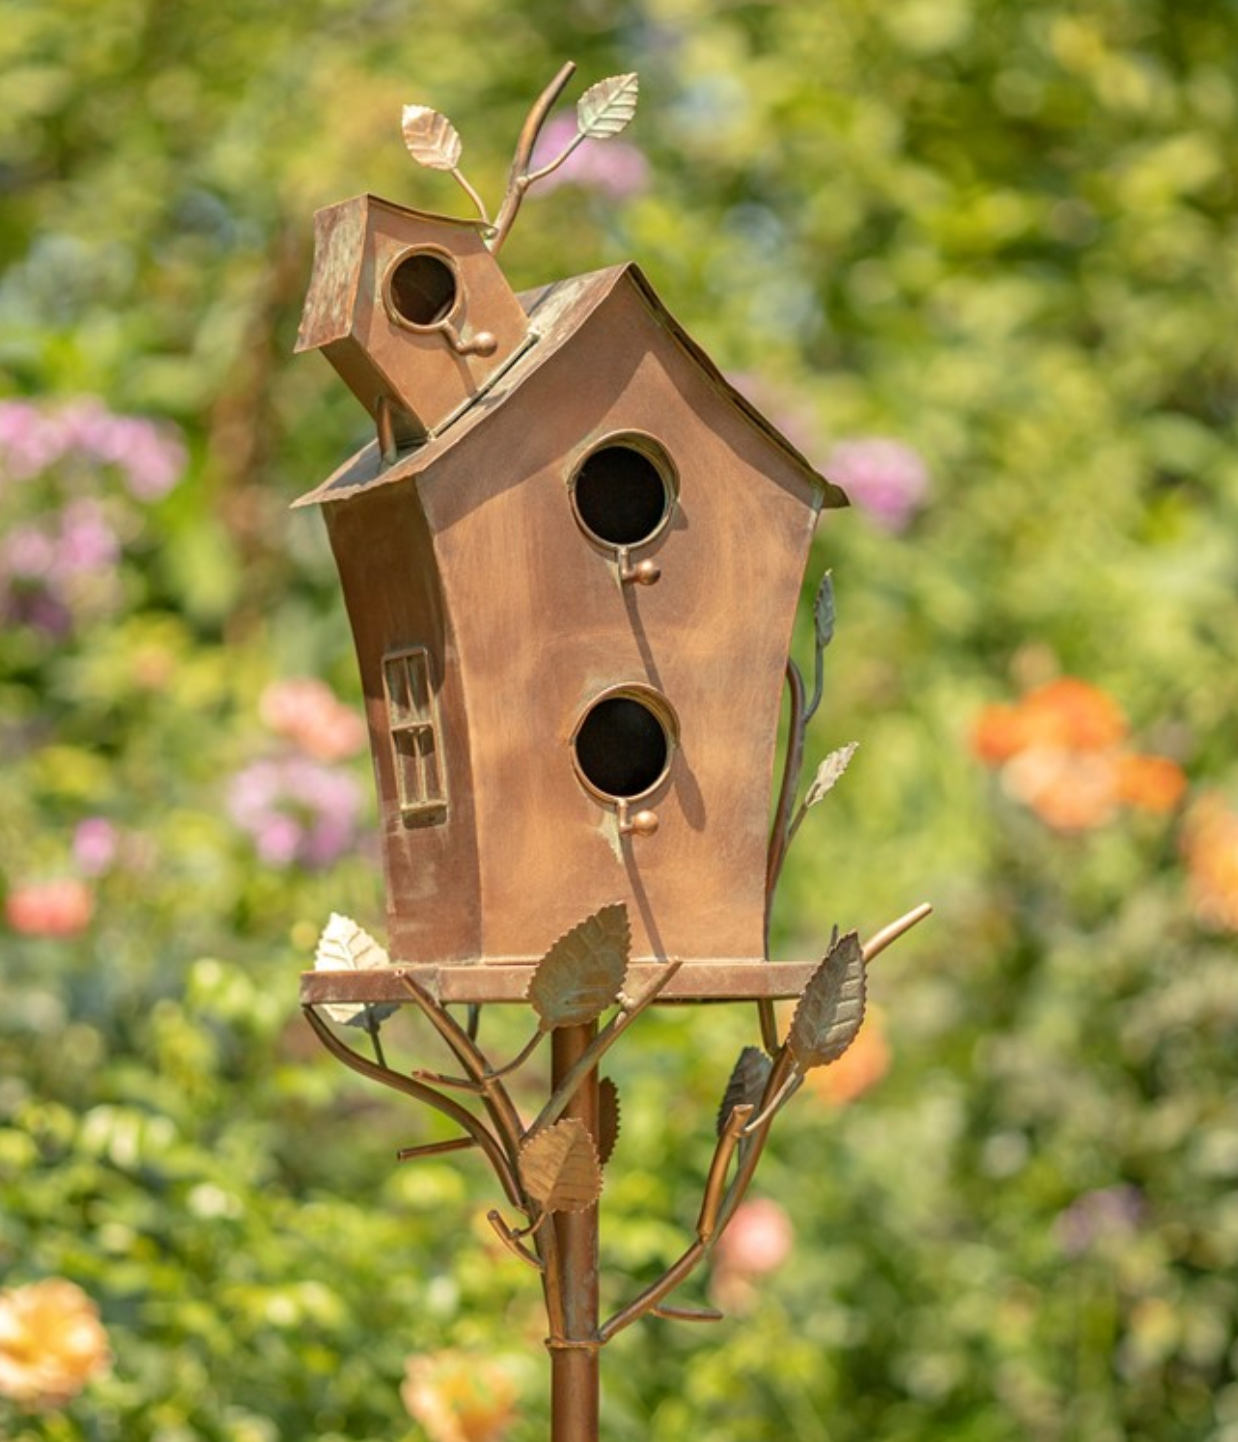 BIRDHOUSE 75.2" TALL LARGE DOUBLE-HOLE BIRDHOUSE STAKE WITH A-FRAME ROOF IN ANTIQUE COPPER